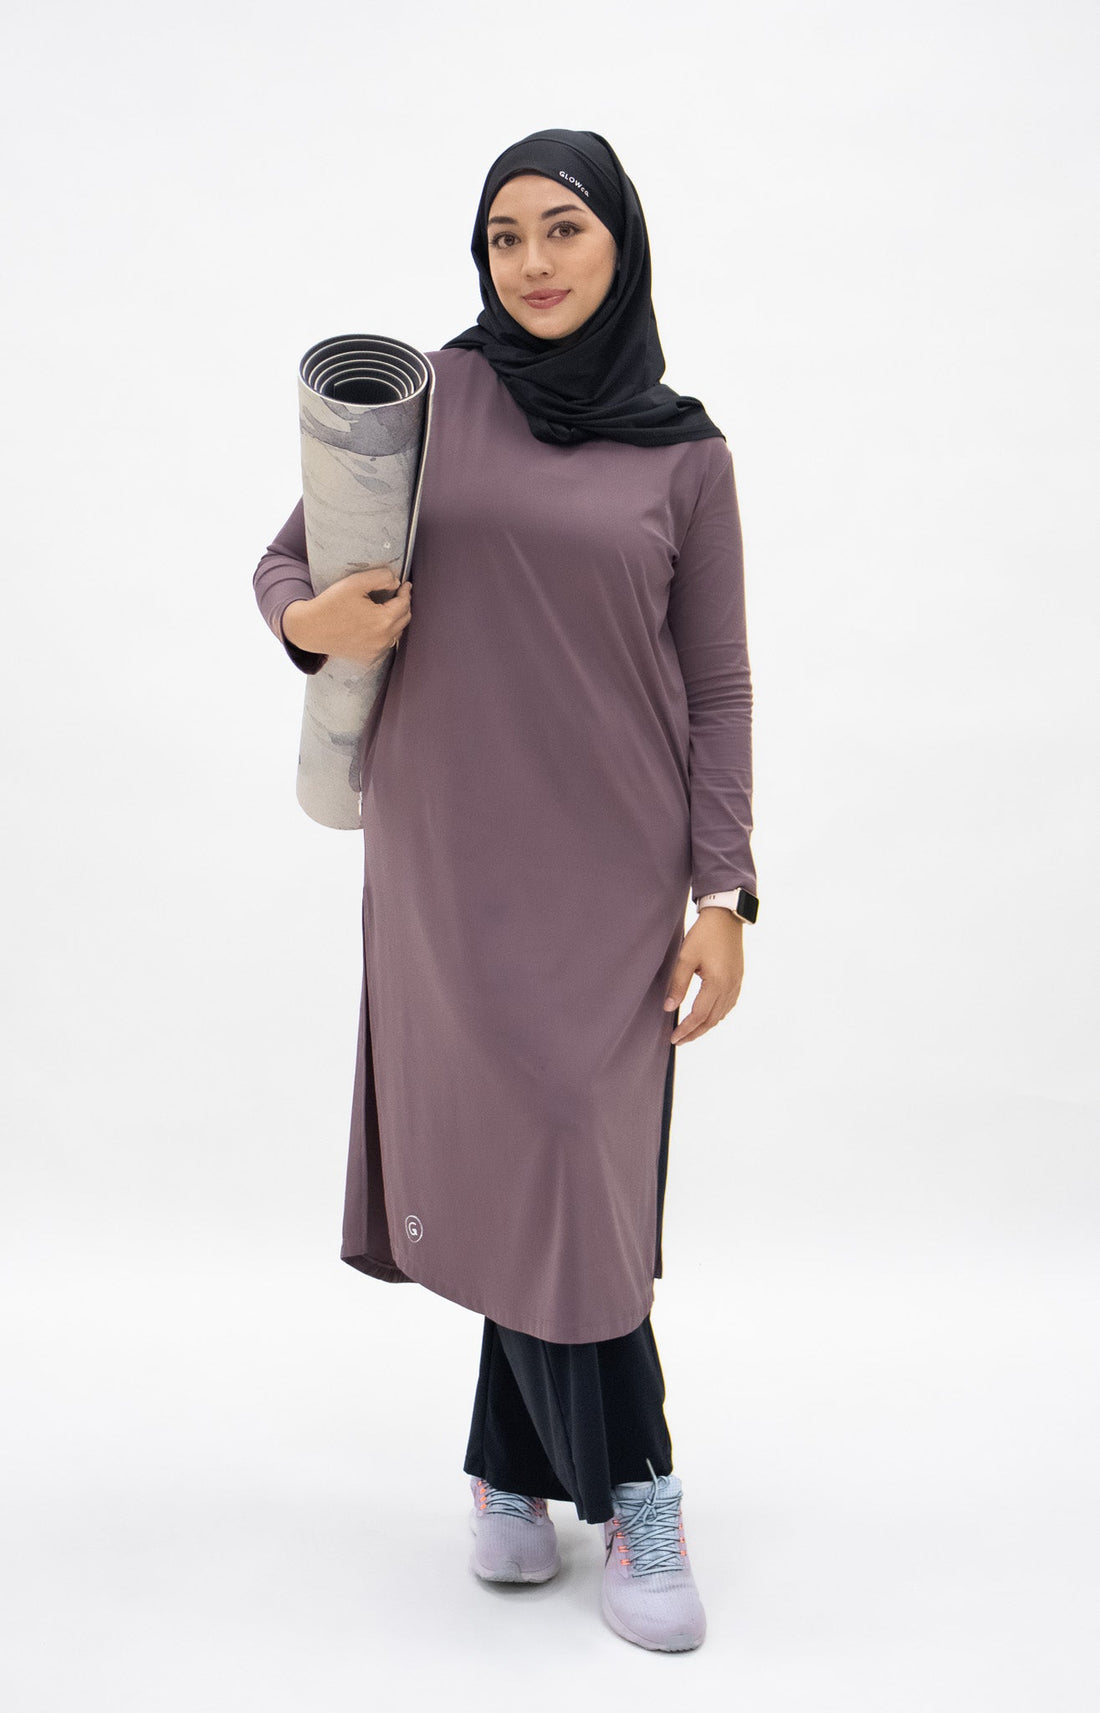 Tops GLOWco Exclusive Ultra Light Active Long Tunic in Desert Mauve